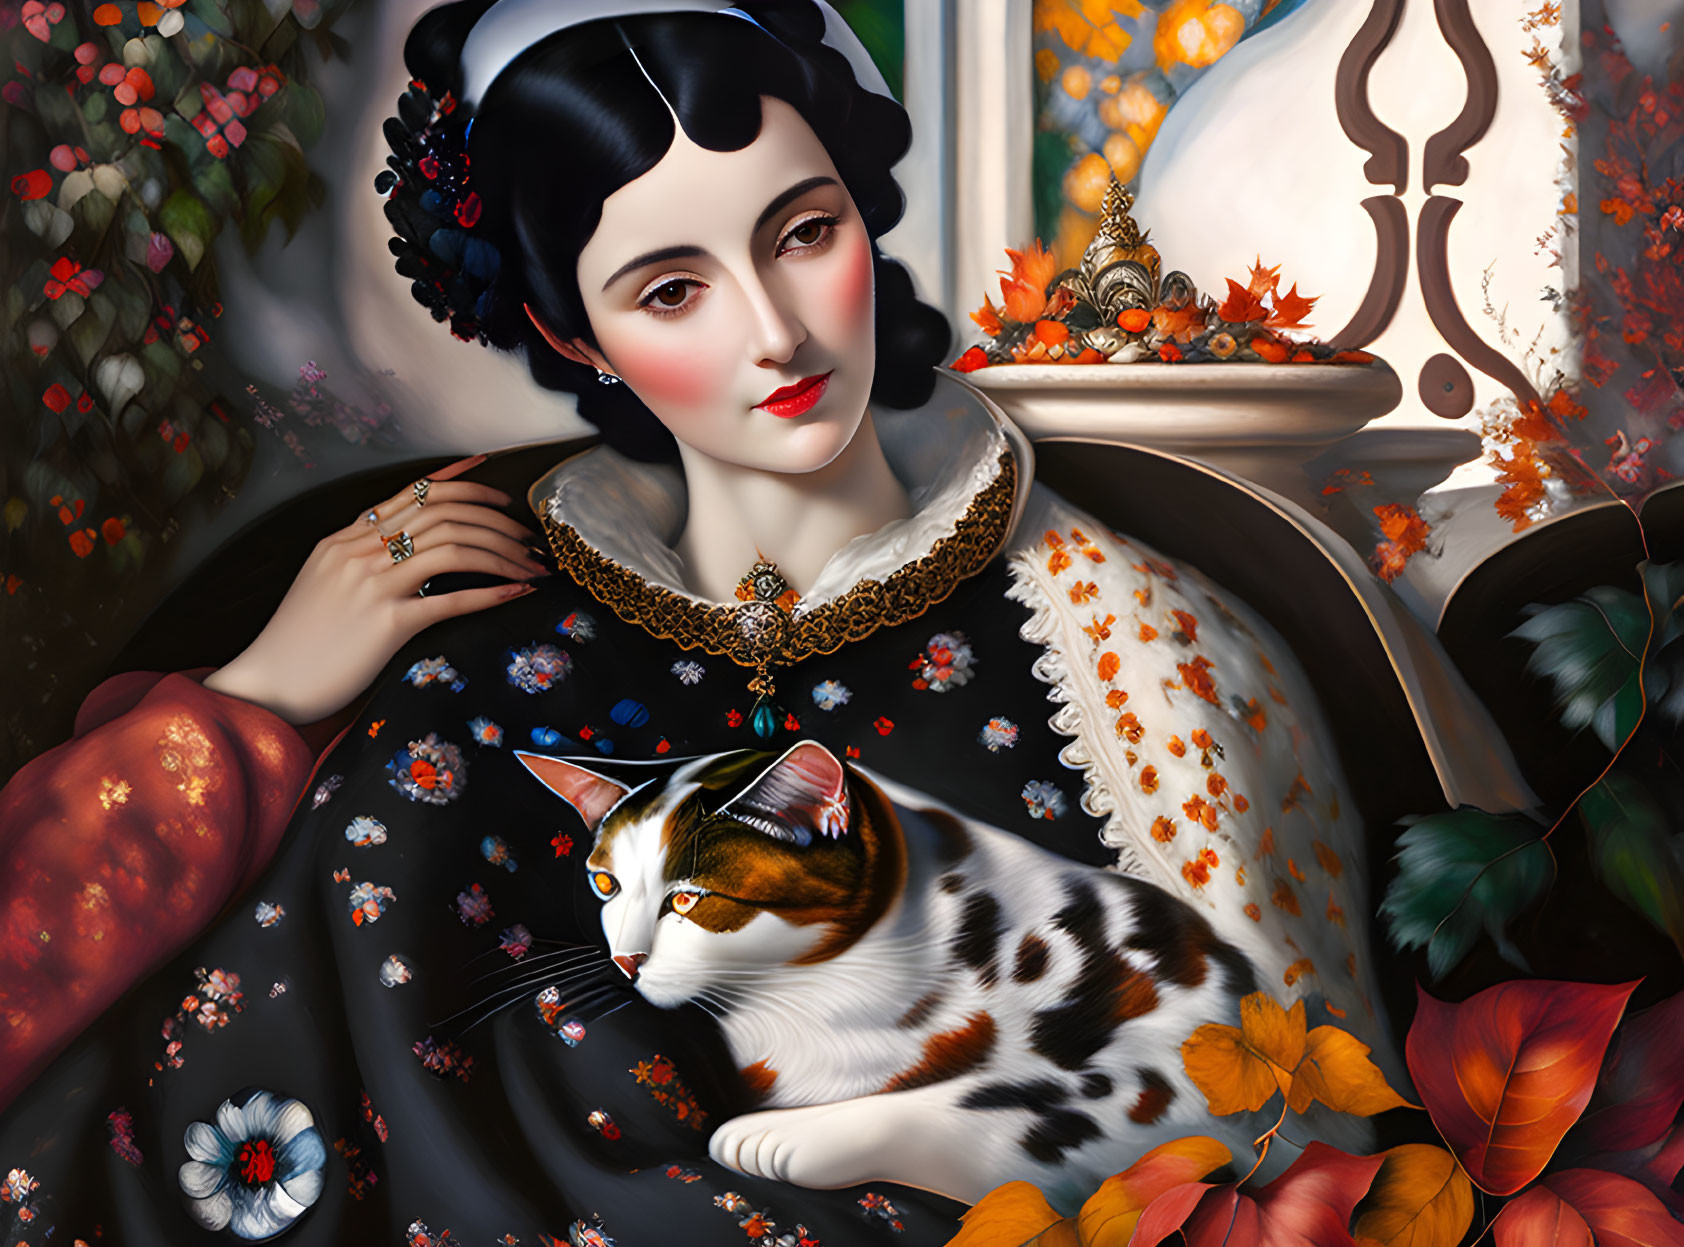 Stylized portrait of woman with pale skin and dark hair beside calico cat in lush setting